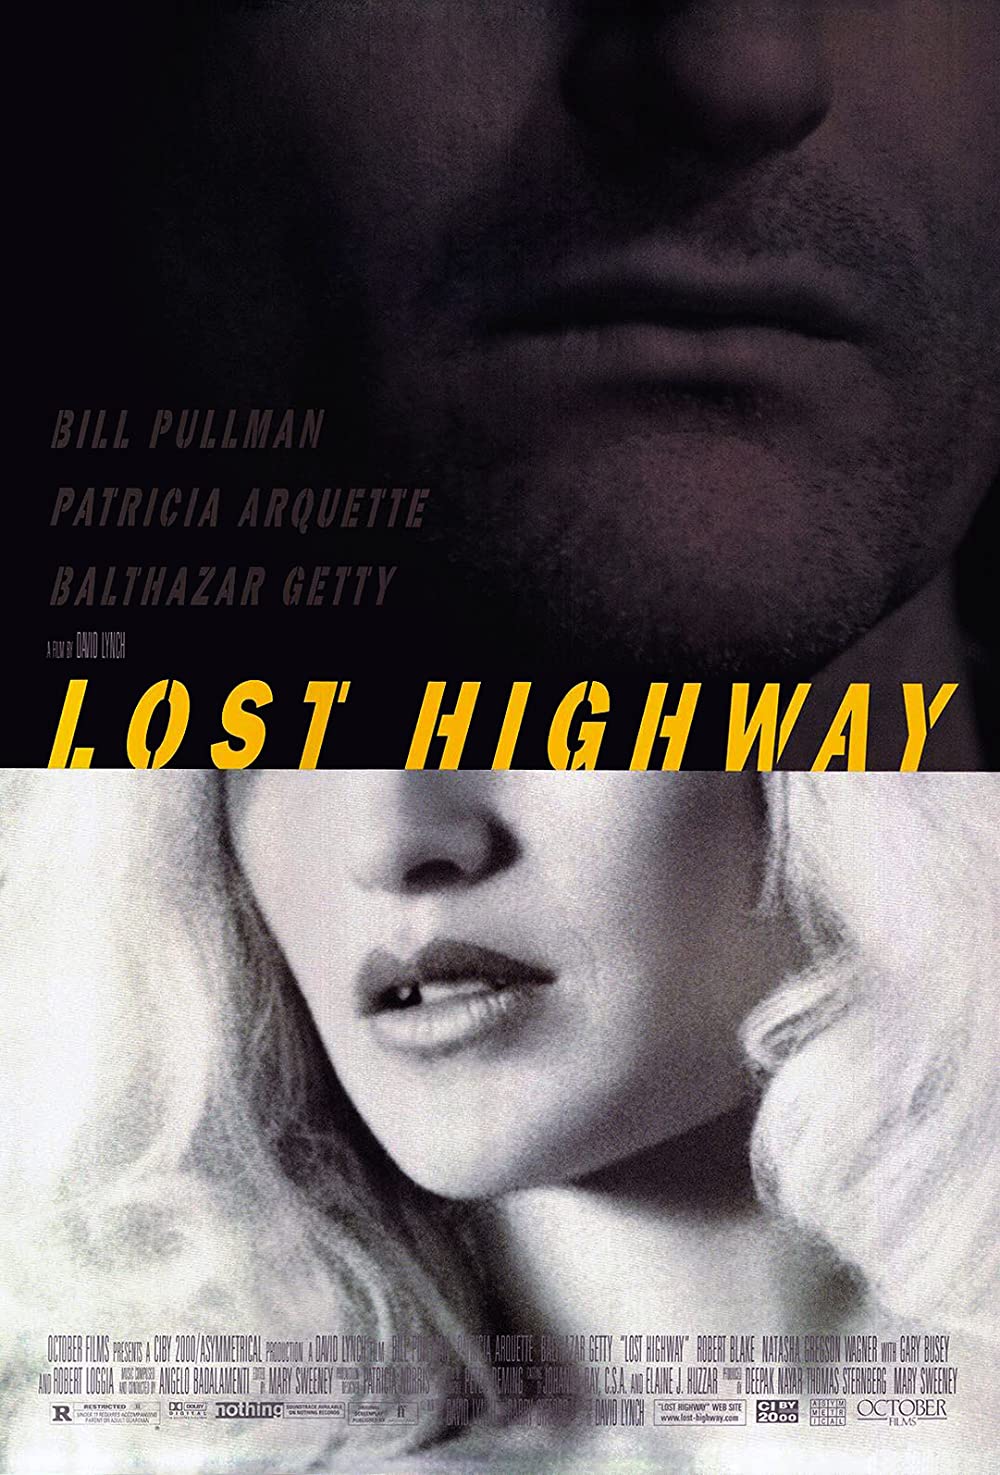 Film Poster for LOST HIGHWAY (1997)